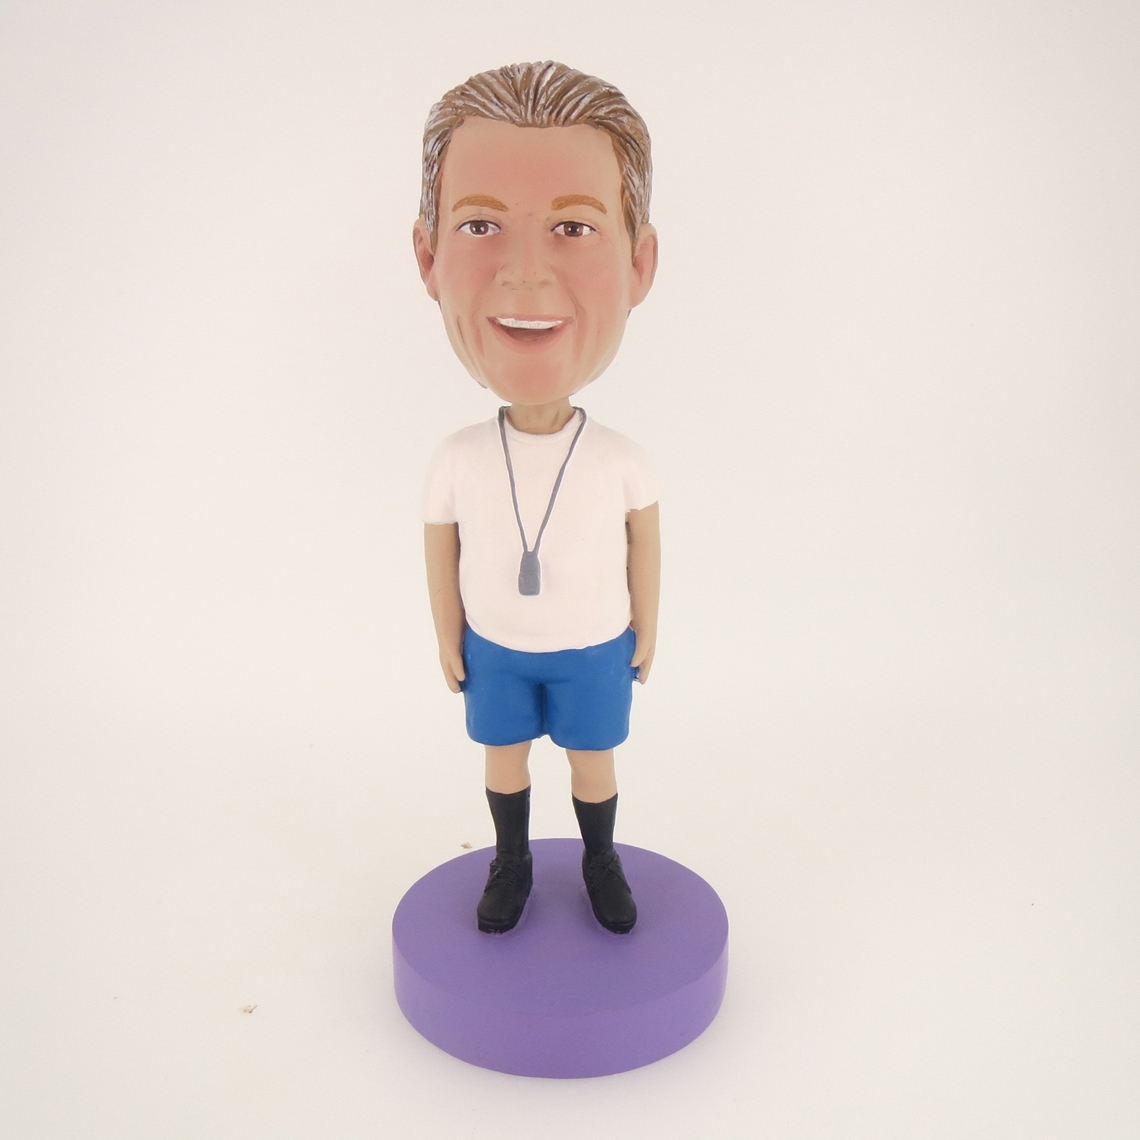 Picture of Custom Bobblehead Doll: Referee With White Shirt